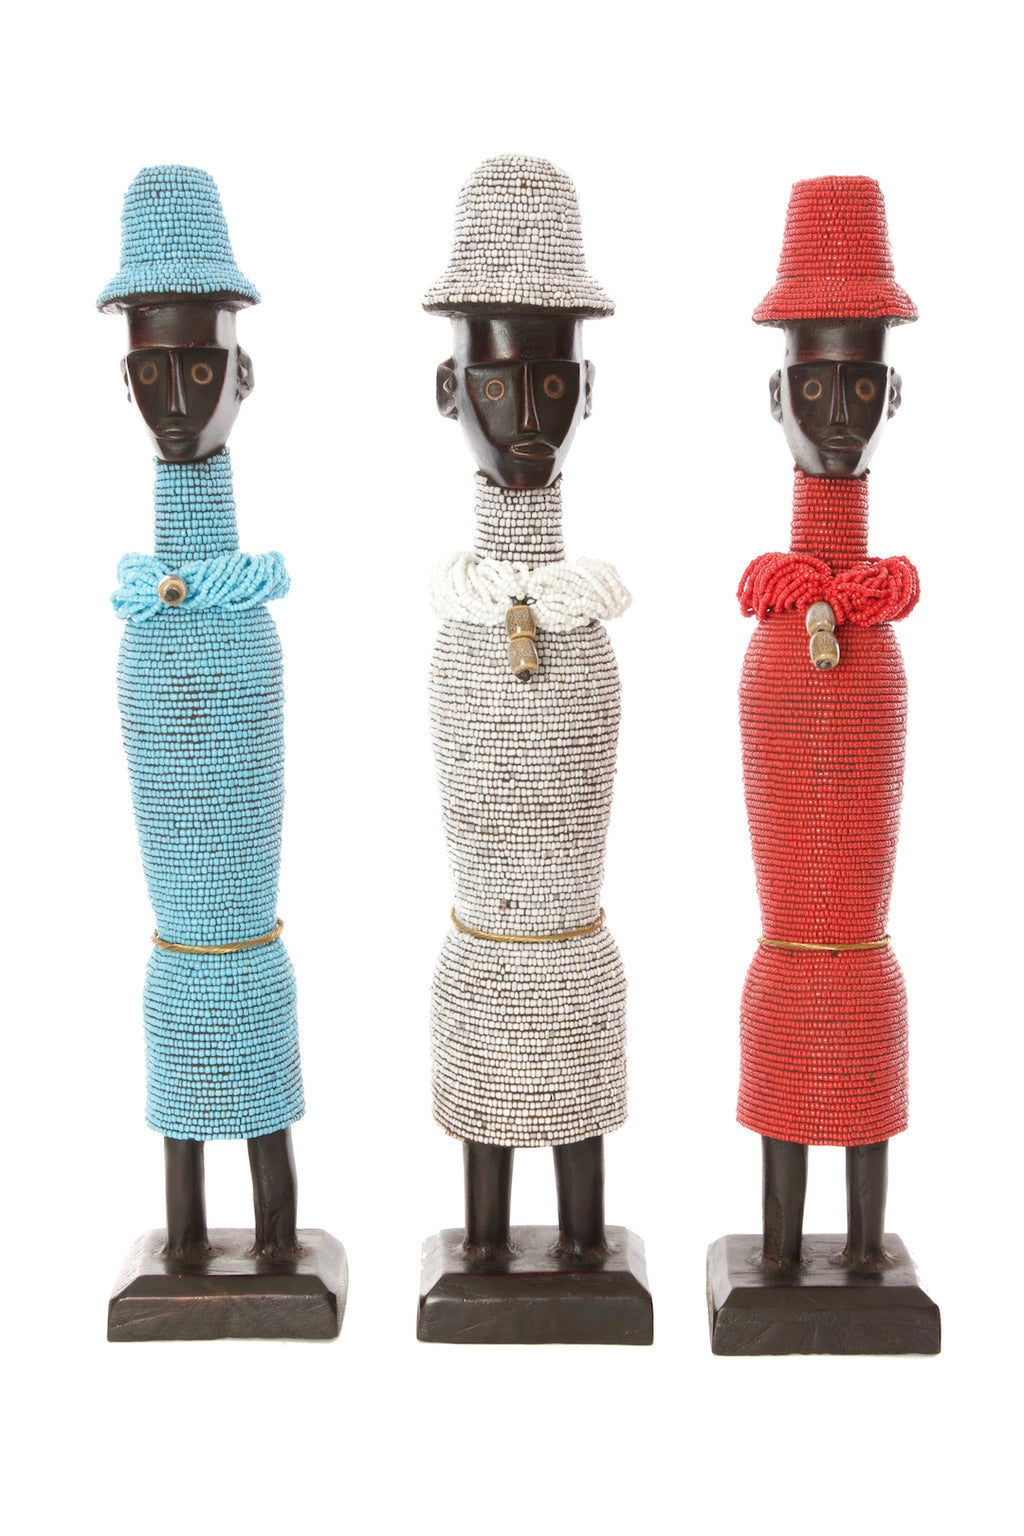 19" Beaded Namji Dolls with Necklaces and Hats